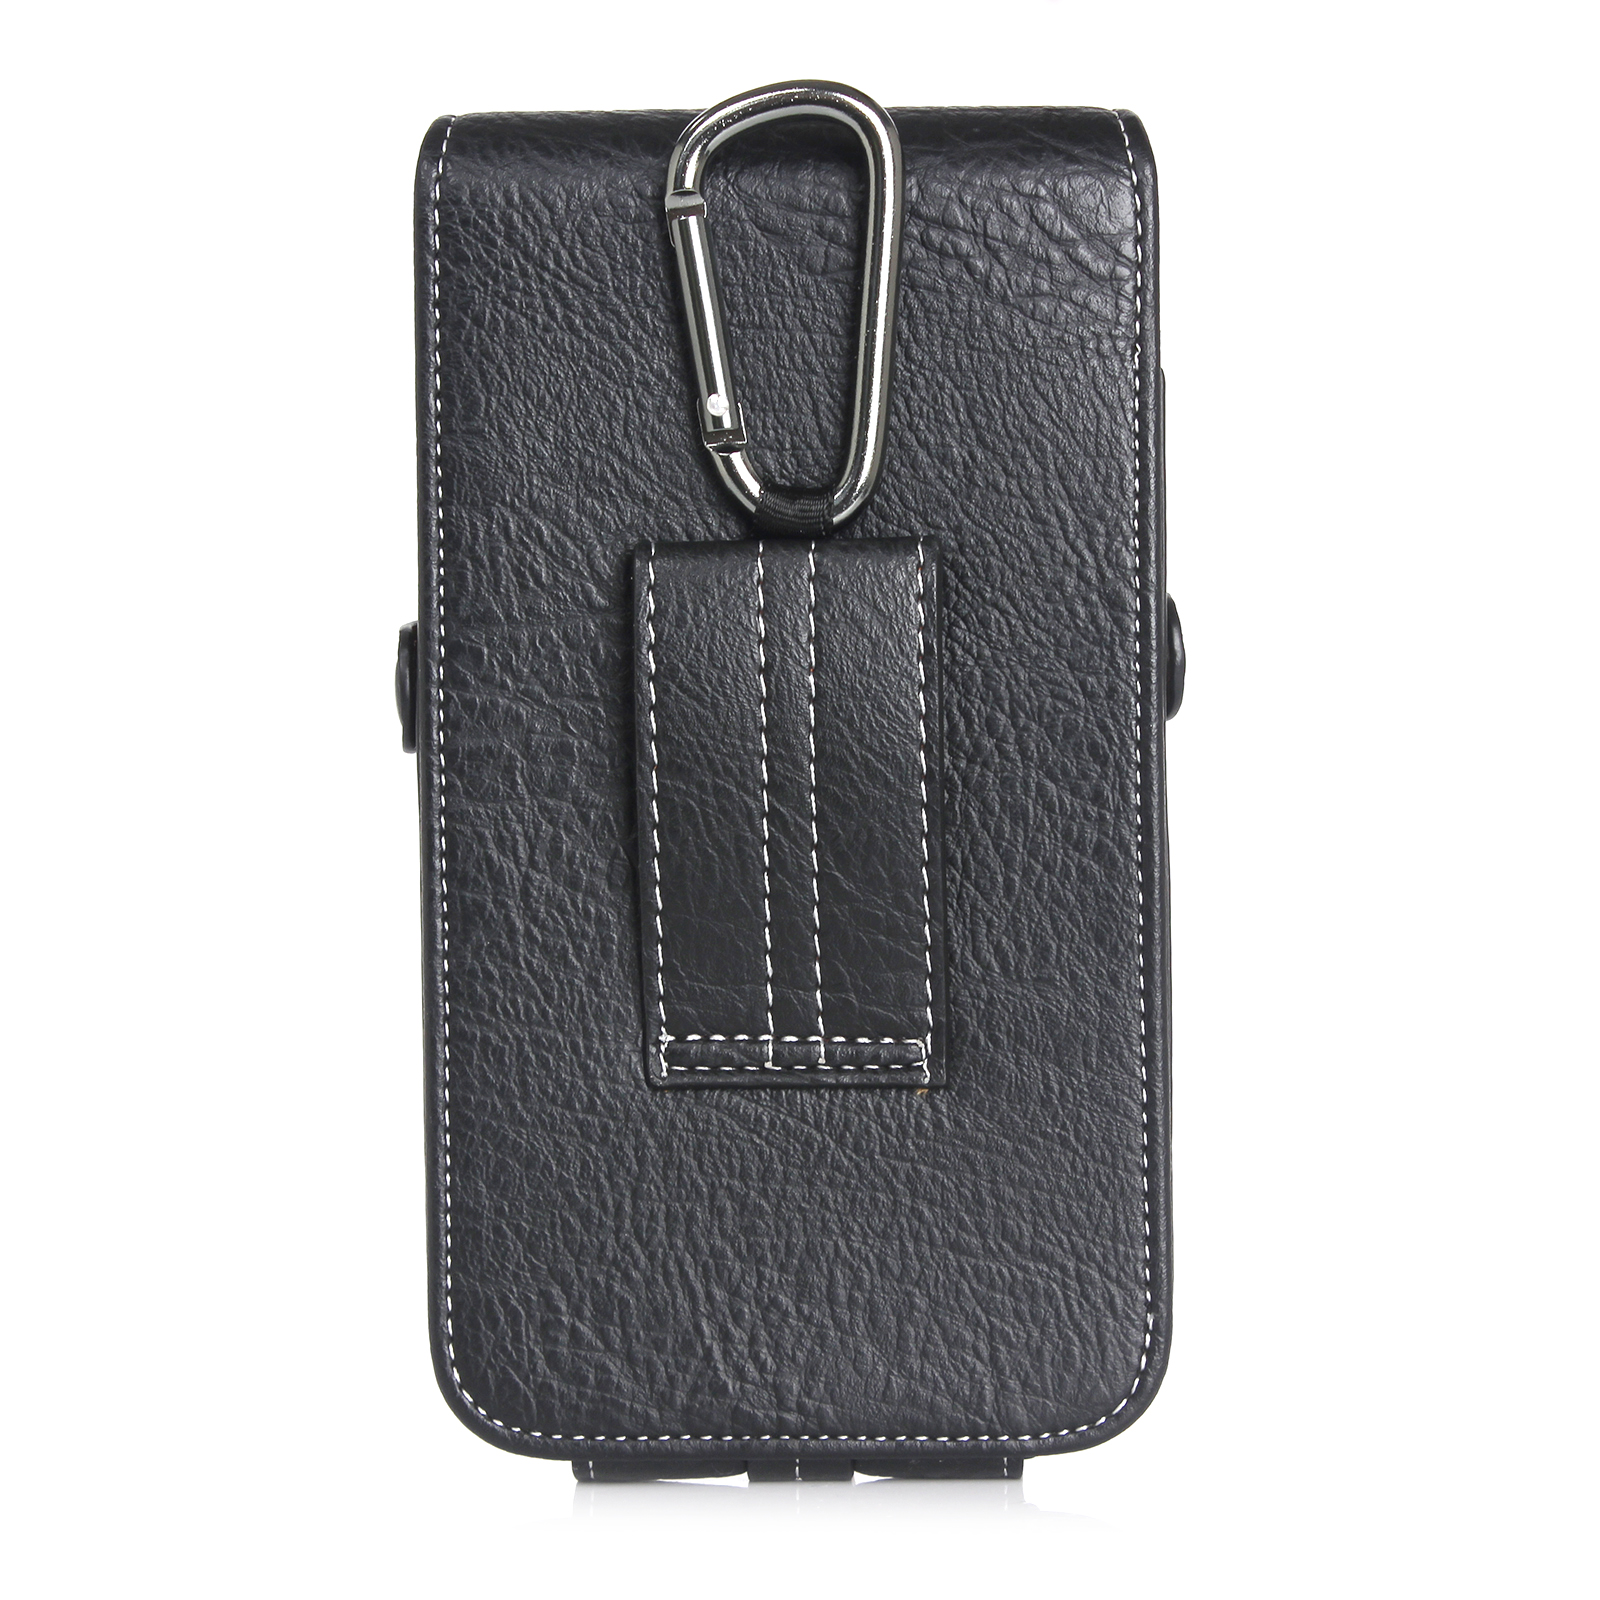 Bakeey-Casual-Vintage-Bussiness-64-inch-Vertical-Multi-Pocket-Multi-Card-Slot-PU-Leather-Mobile-Phon-1692765-4